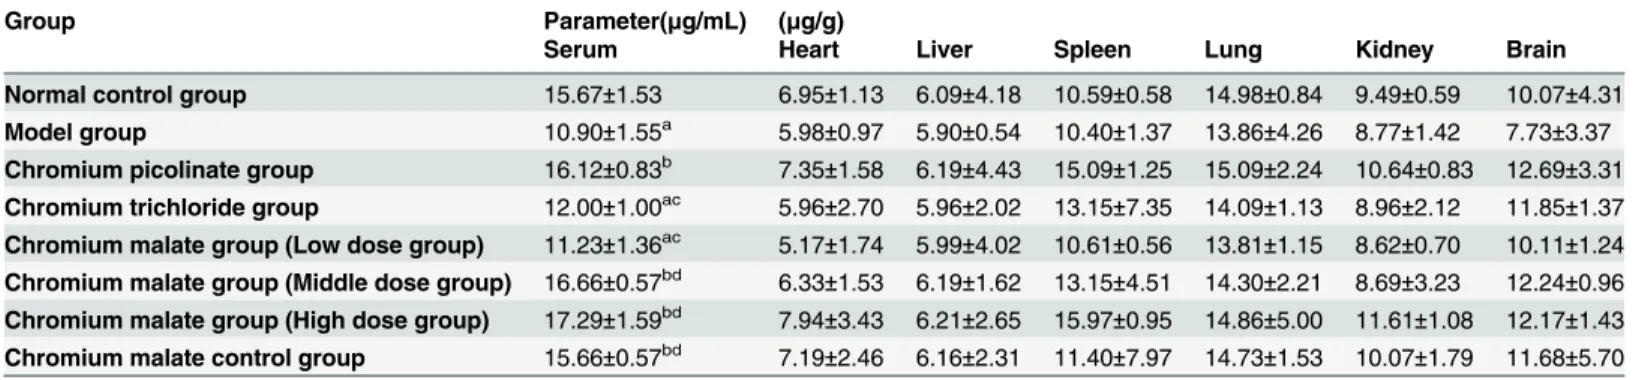 Table 2. Effects of chromium malate (Cr content) on the biochemical changes in the serum and organs of normal rats and type 2 diabetic rats.